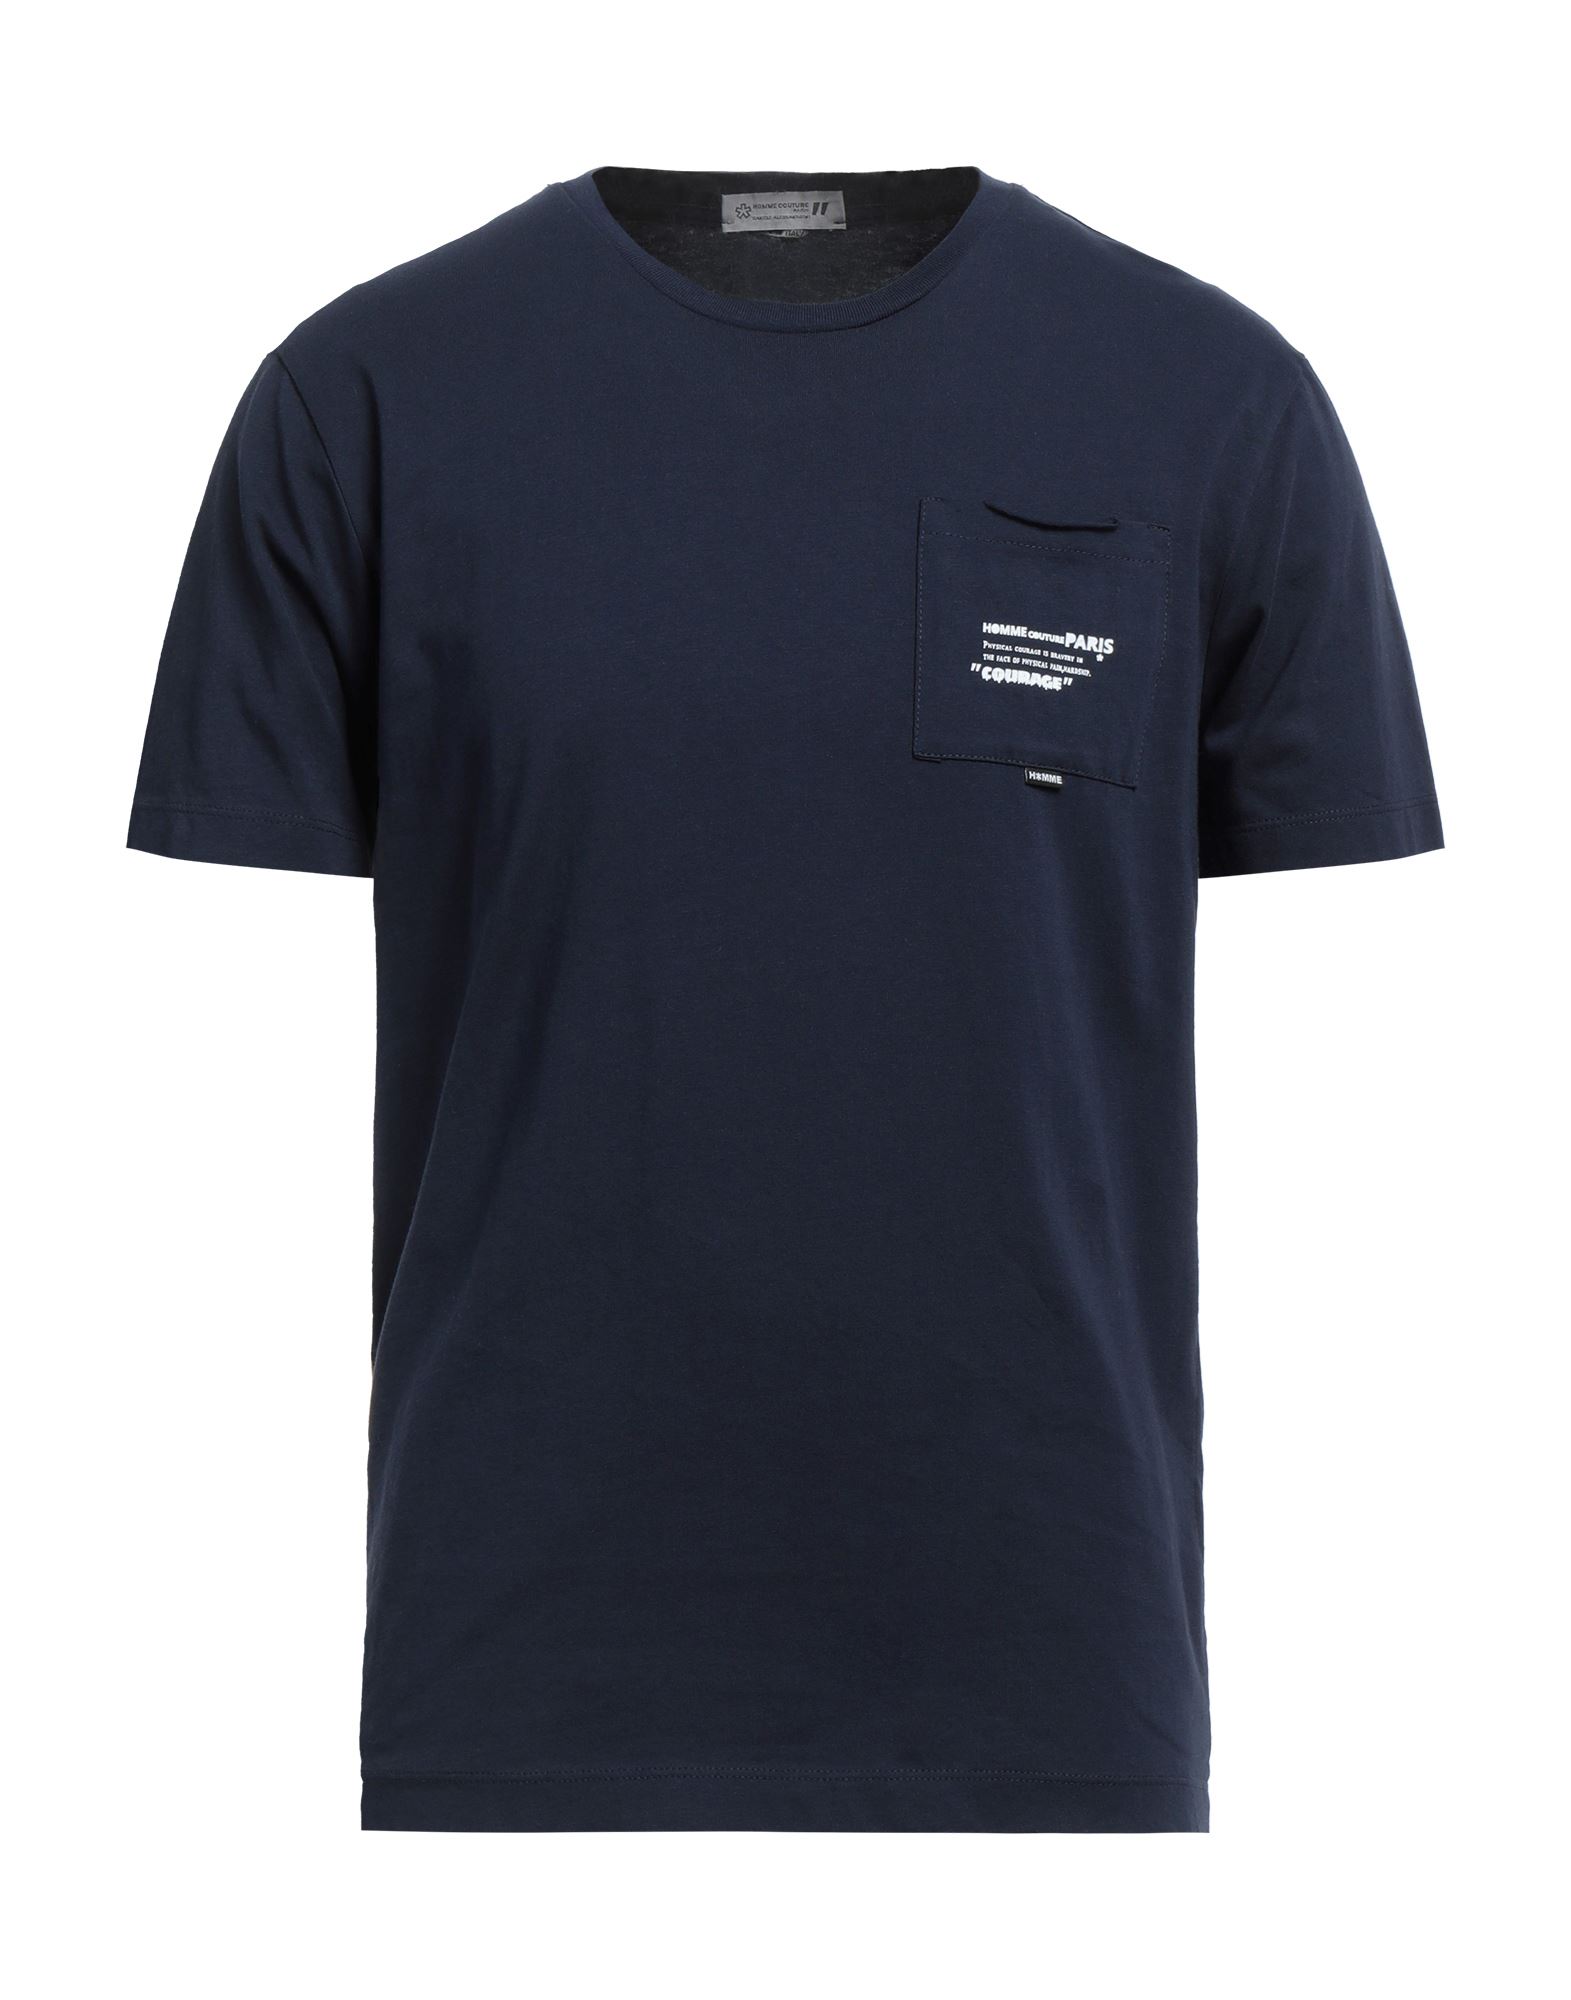 Daniele Alessandrini Homme T-shirts In Navy Blue